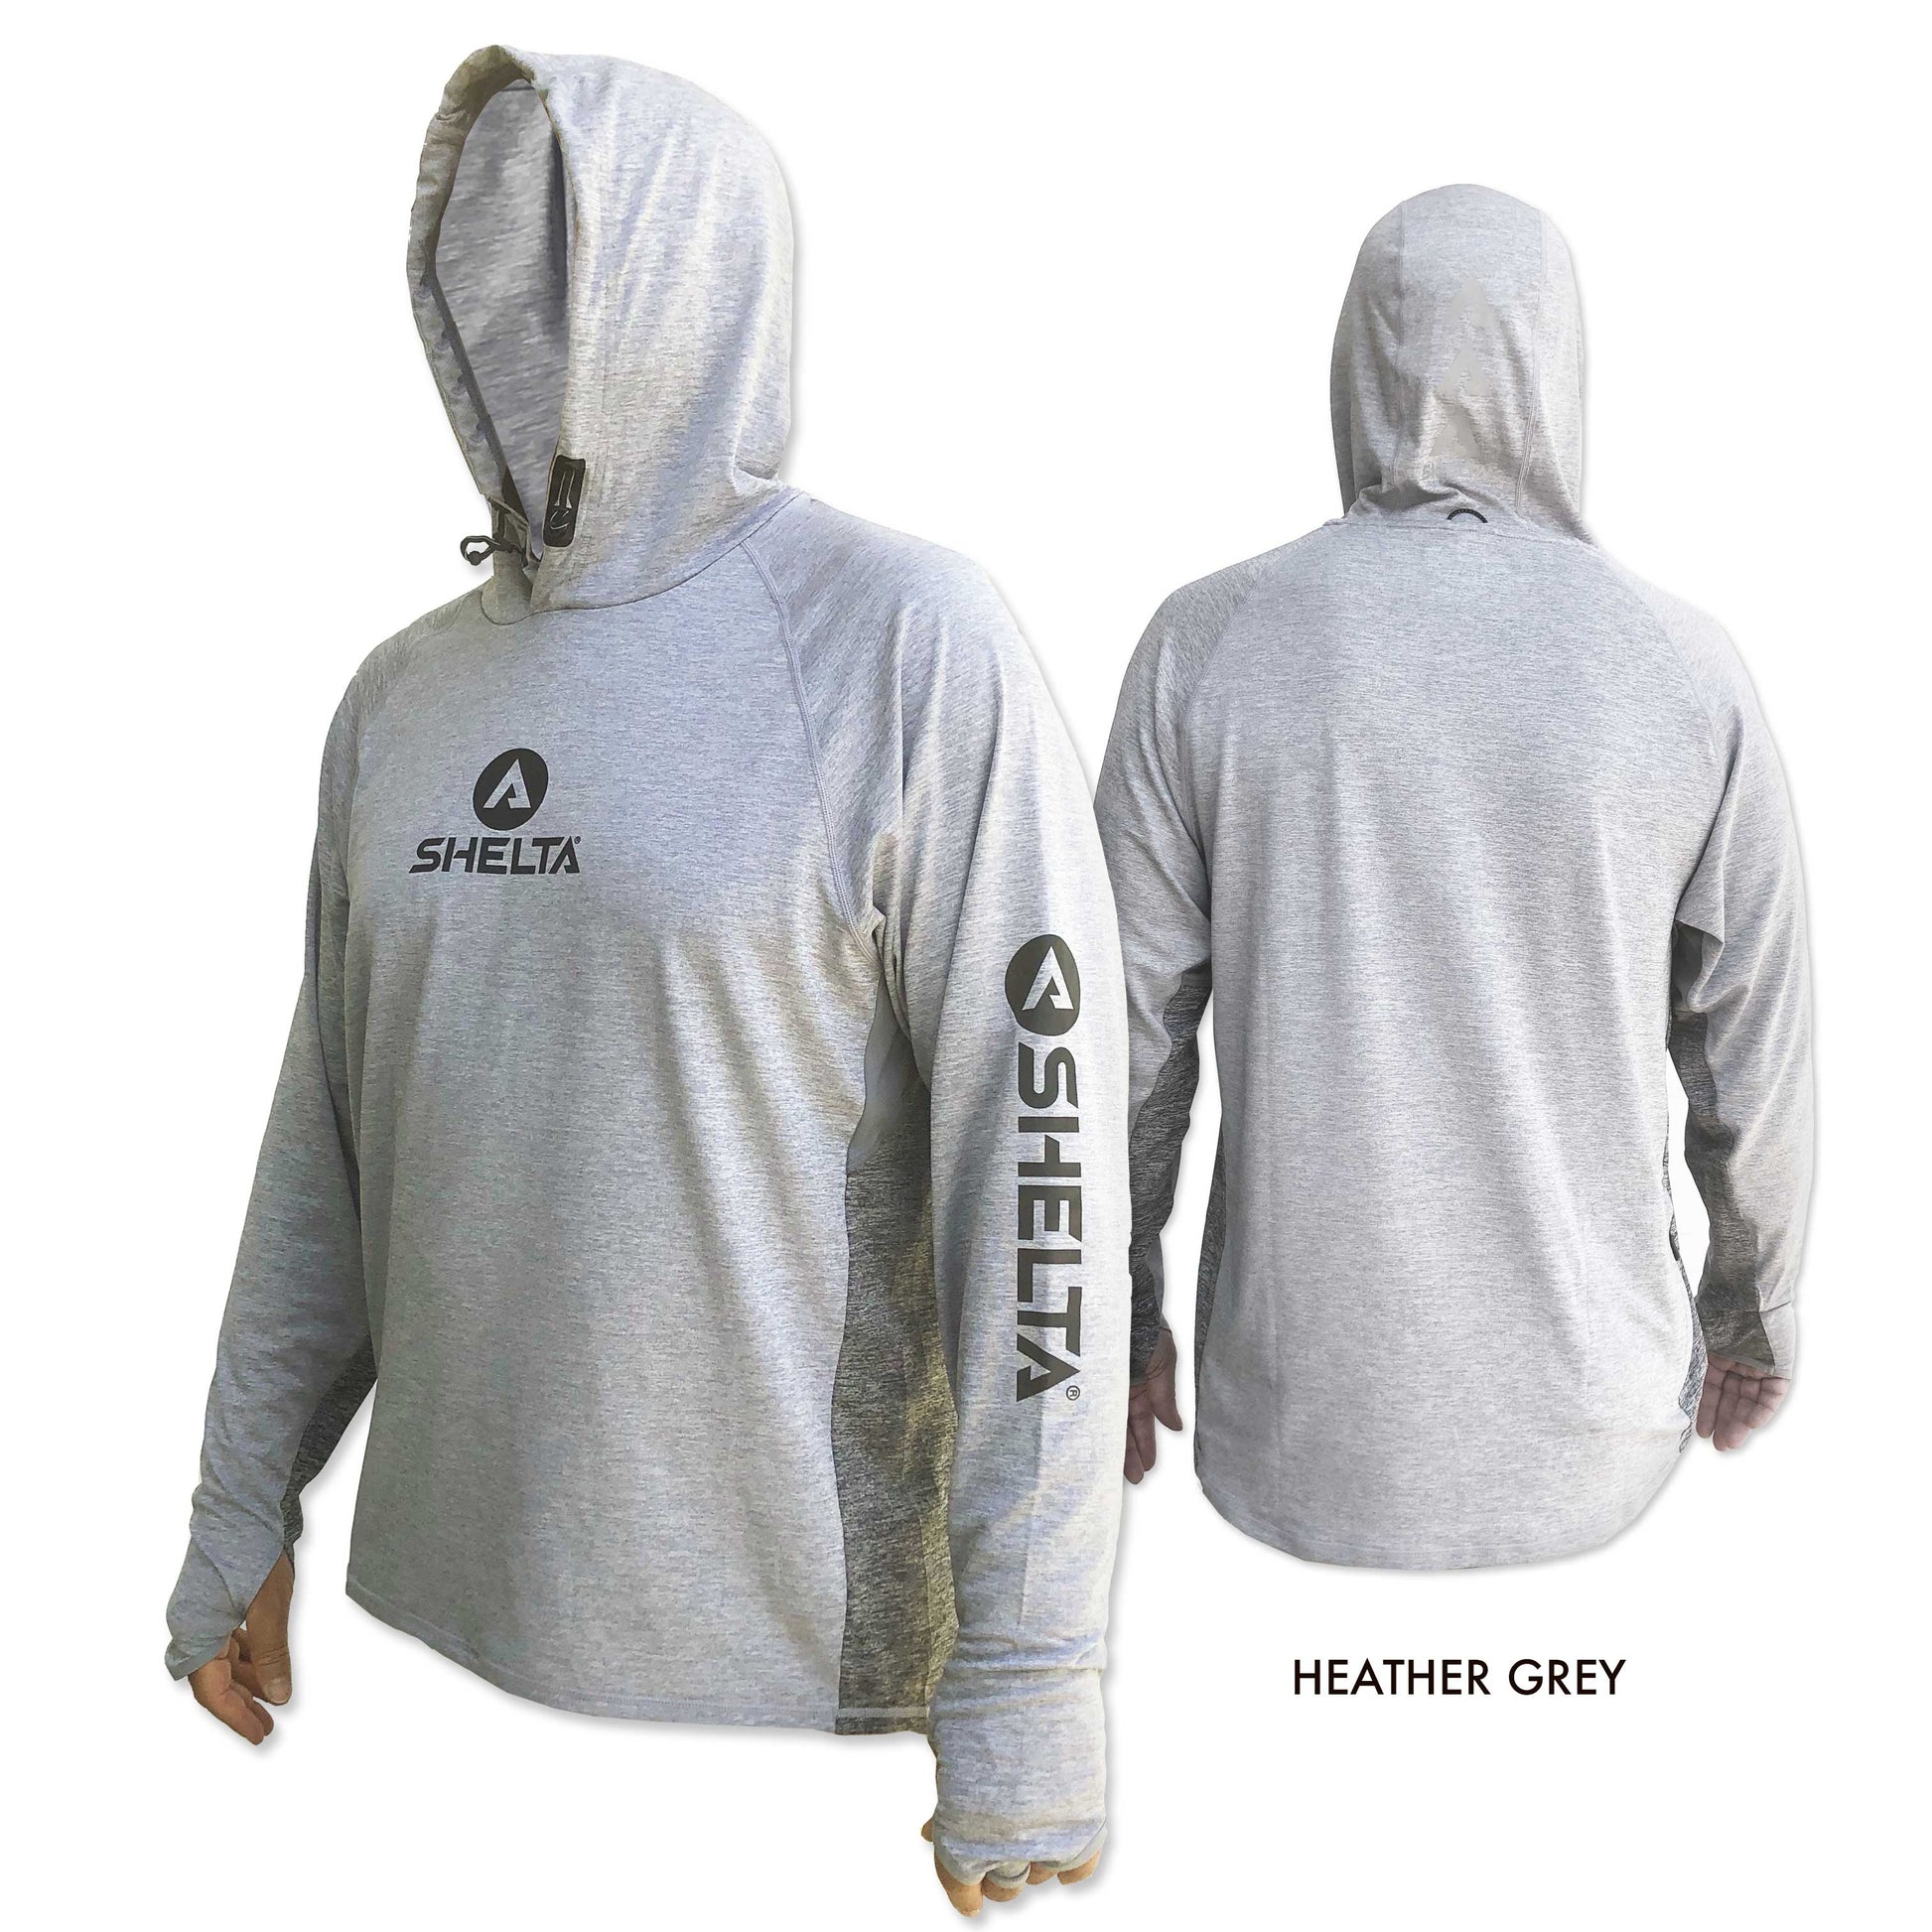 The Assault Hoodie in the Heather Grey Coloris engineered & built with sun protection, function, and durability in mind.  Offering features consistent with Shelta core values and innovation goals.   UPF 50+ UV protection, the highest rating given.  Blocks 98% of UVA/UVB radiation Loose comfort fit Moisture Wicking Sleeves with thumb hole & finger loop for multiple hand protection options